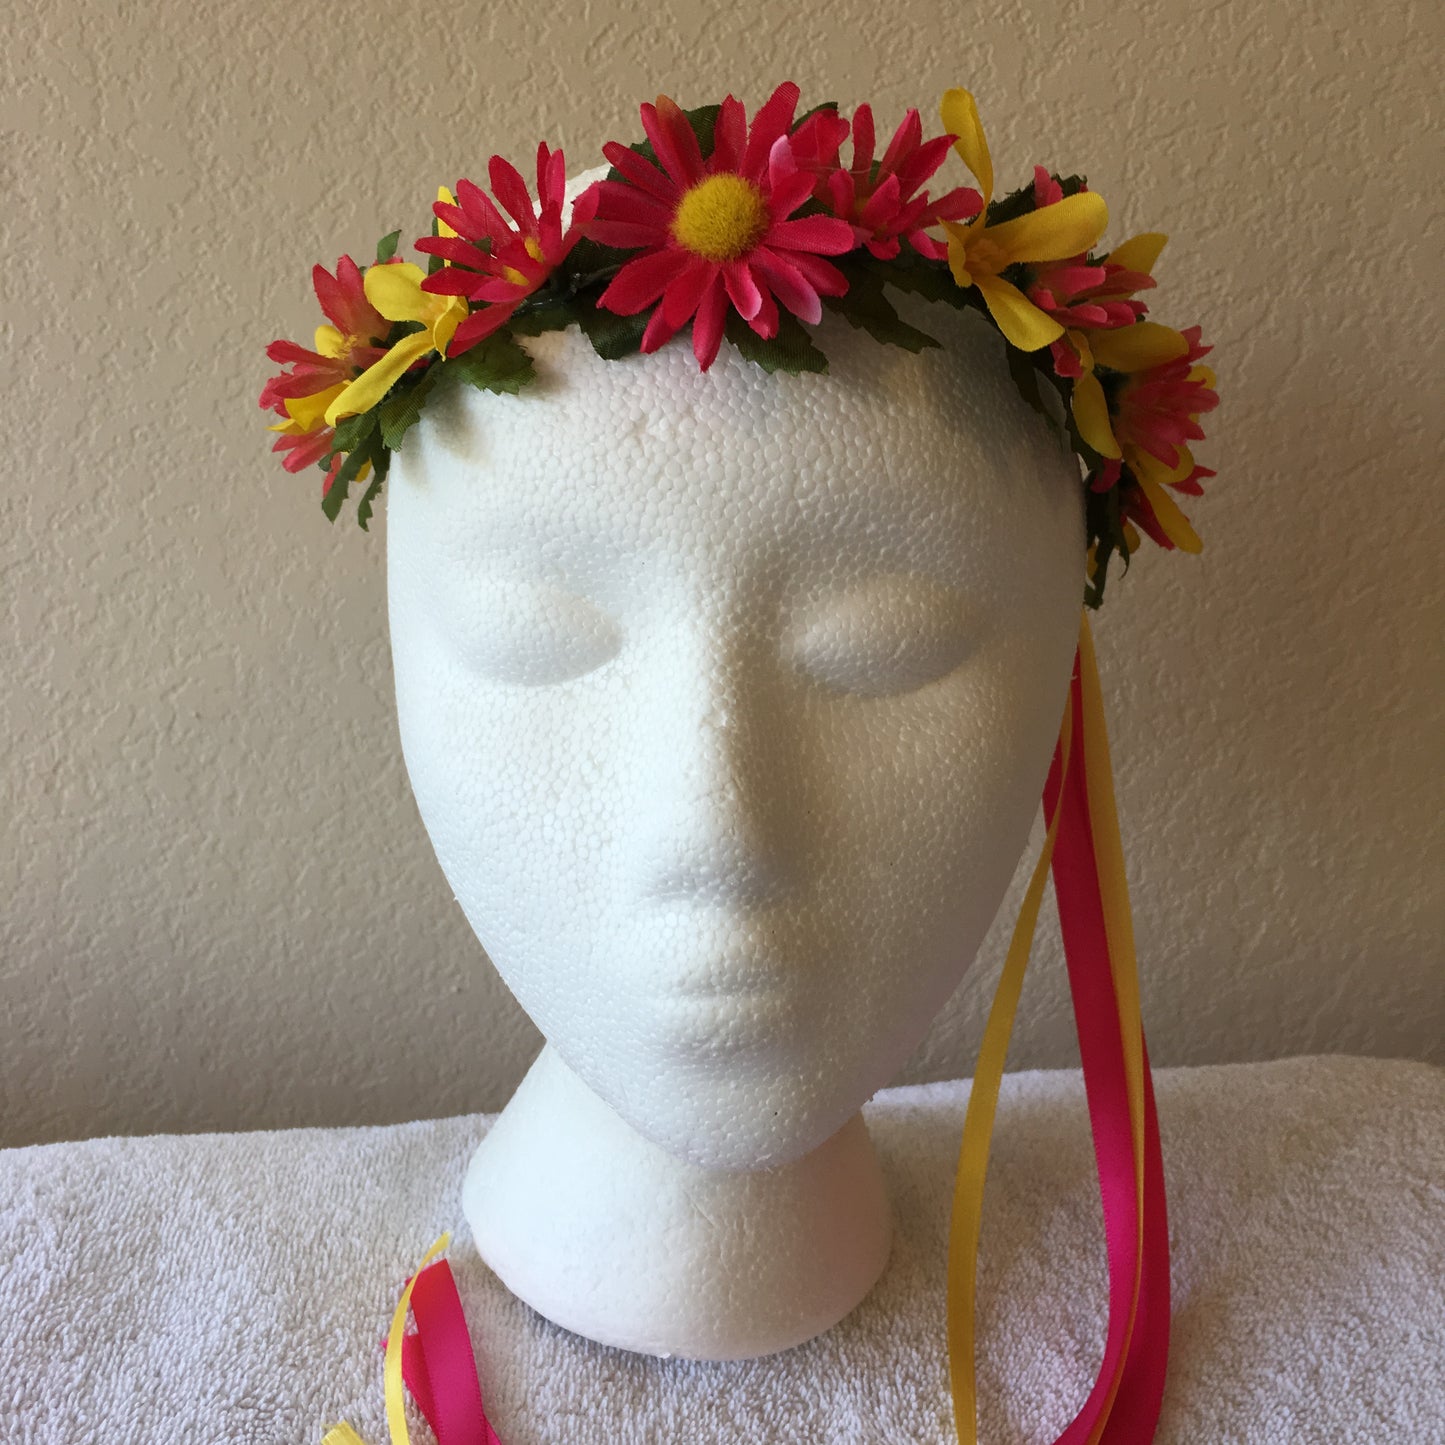 Extra Small Wreath - Pink & yellow daisies